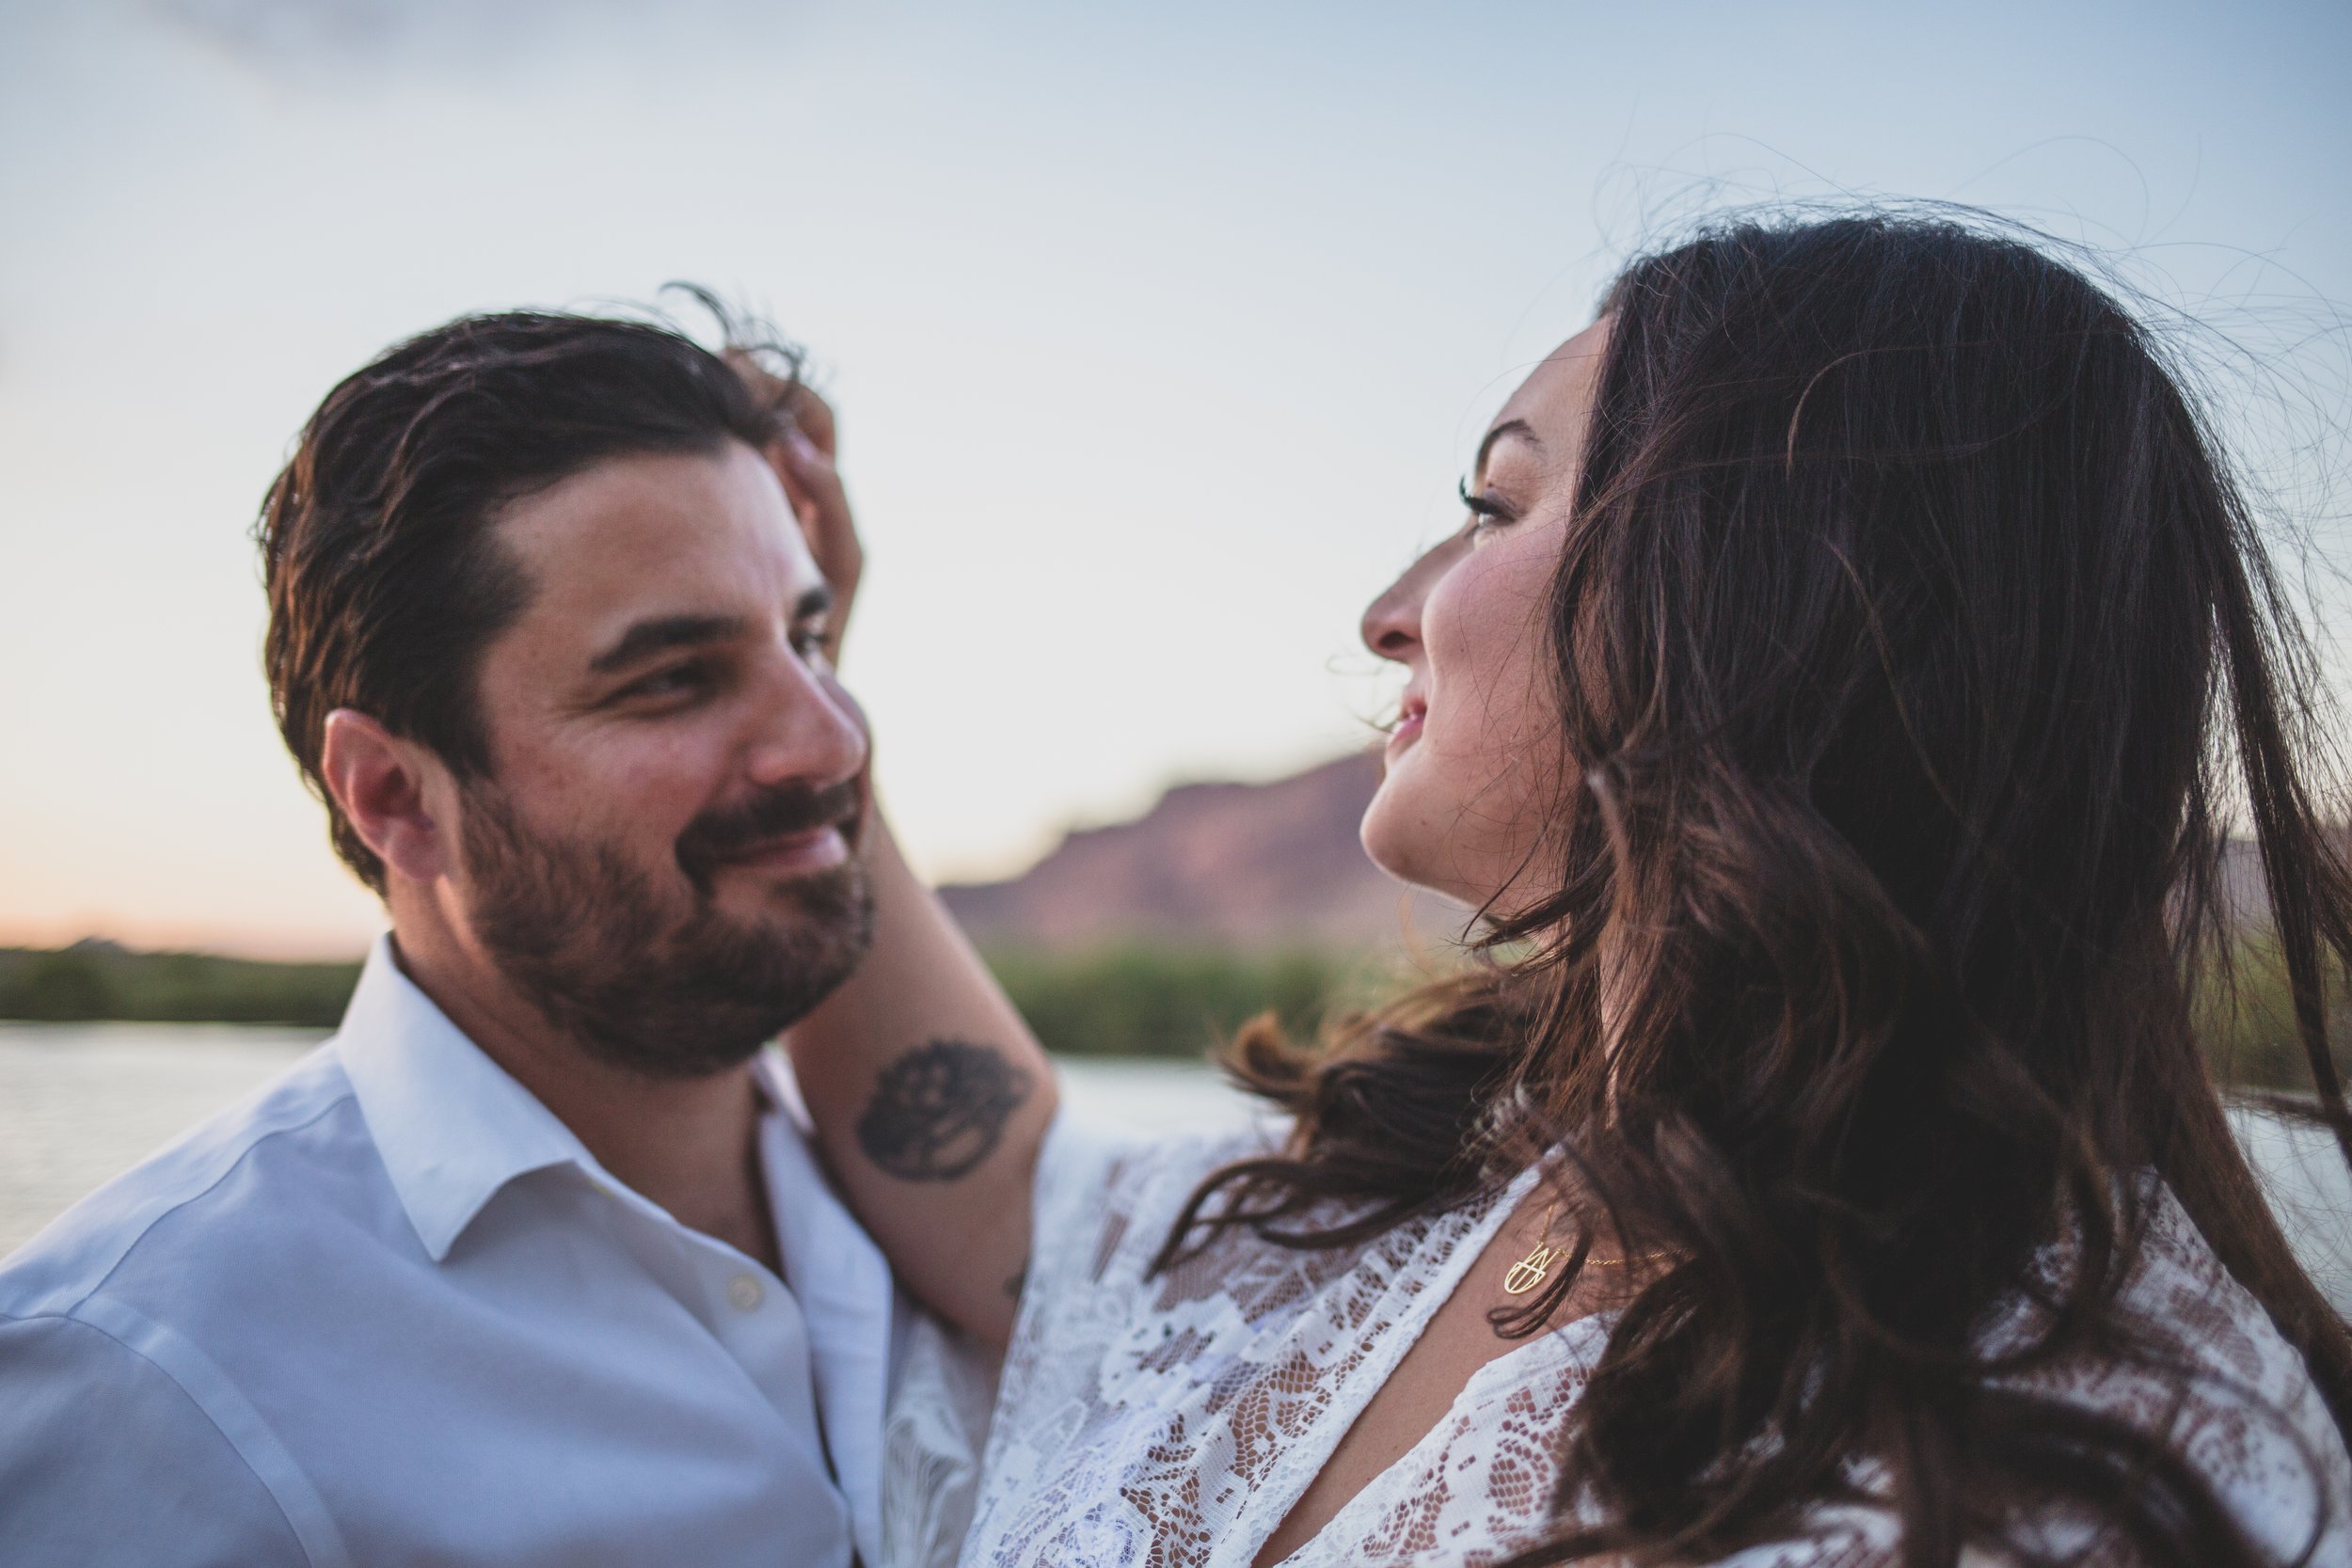 Romantic couple poses with the wind in their hair for maternity photos near the water at the Salt River by timeless Phoenix maternity photographer; Jennifer Lind Schutsky.